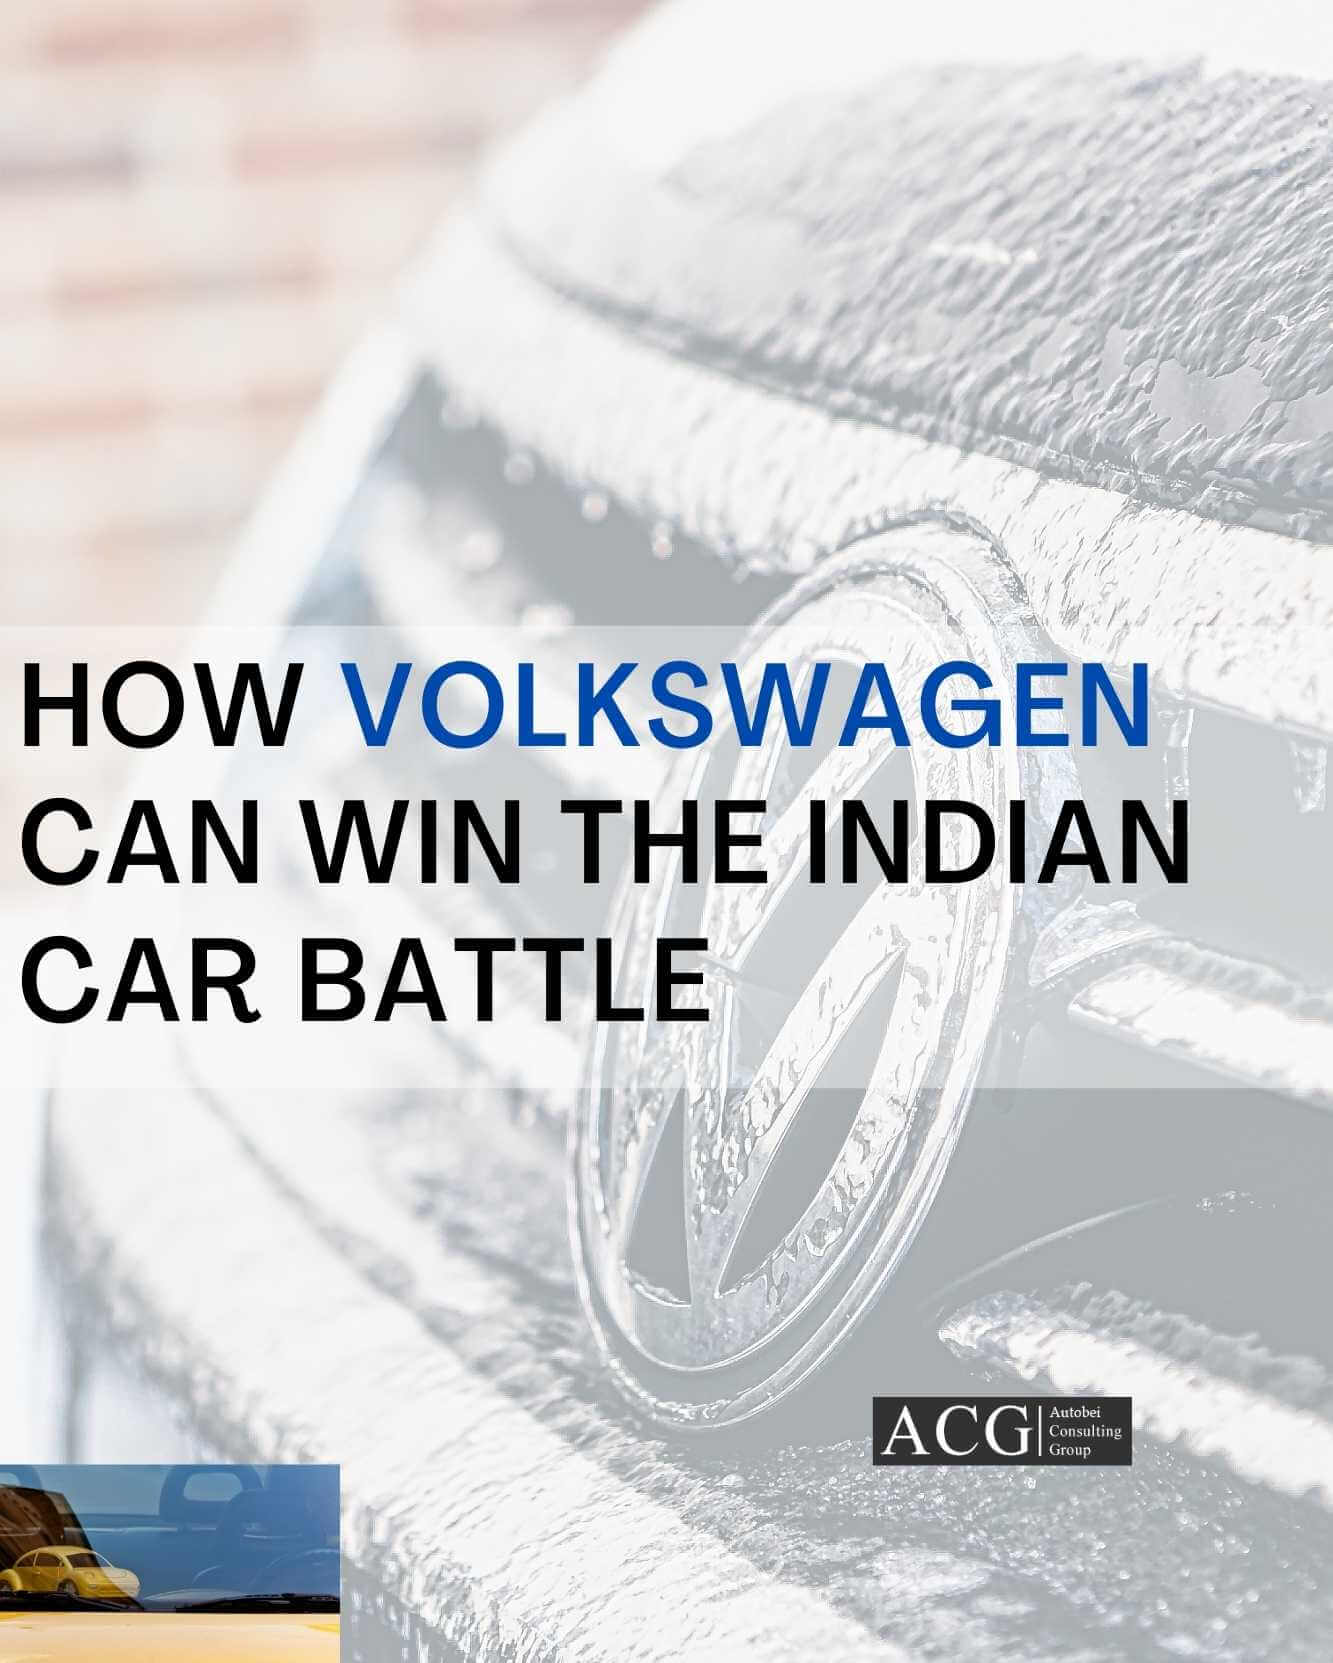 How Volkswagen can win the Indian Car battle